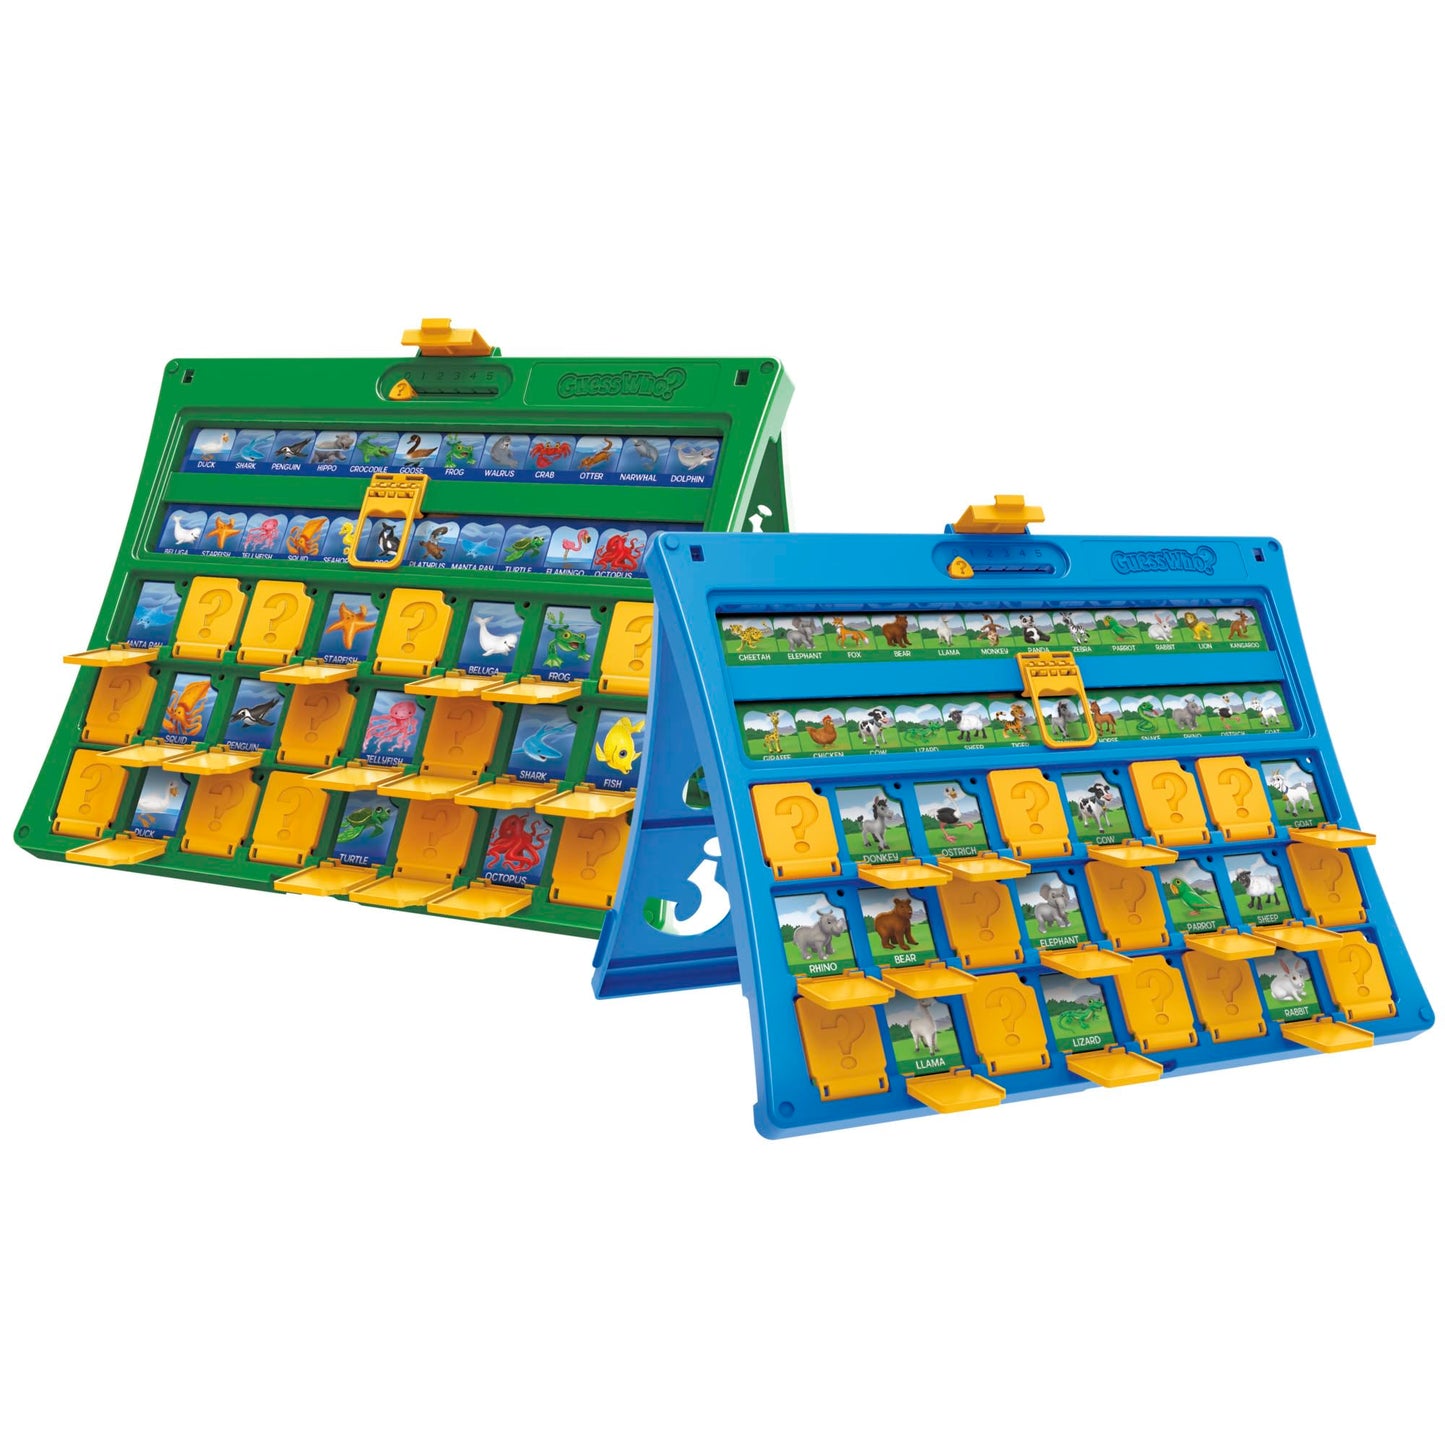 Hasbro Gaming Guess Who? Animal Friends Game, Includes 2 Double-Sided Animal Sheets, 2-Player Board Games for Kids, Ages 6+ (Amazon Exclusive)